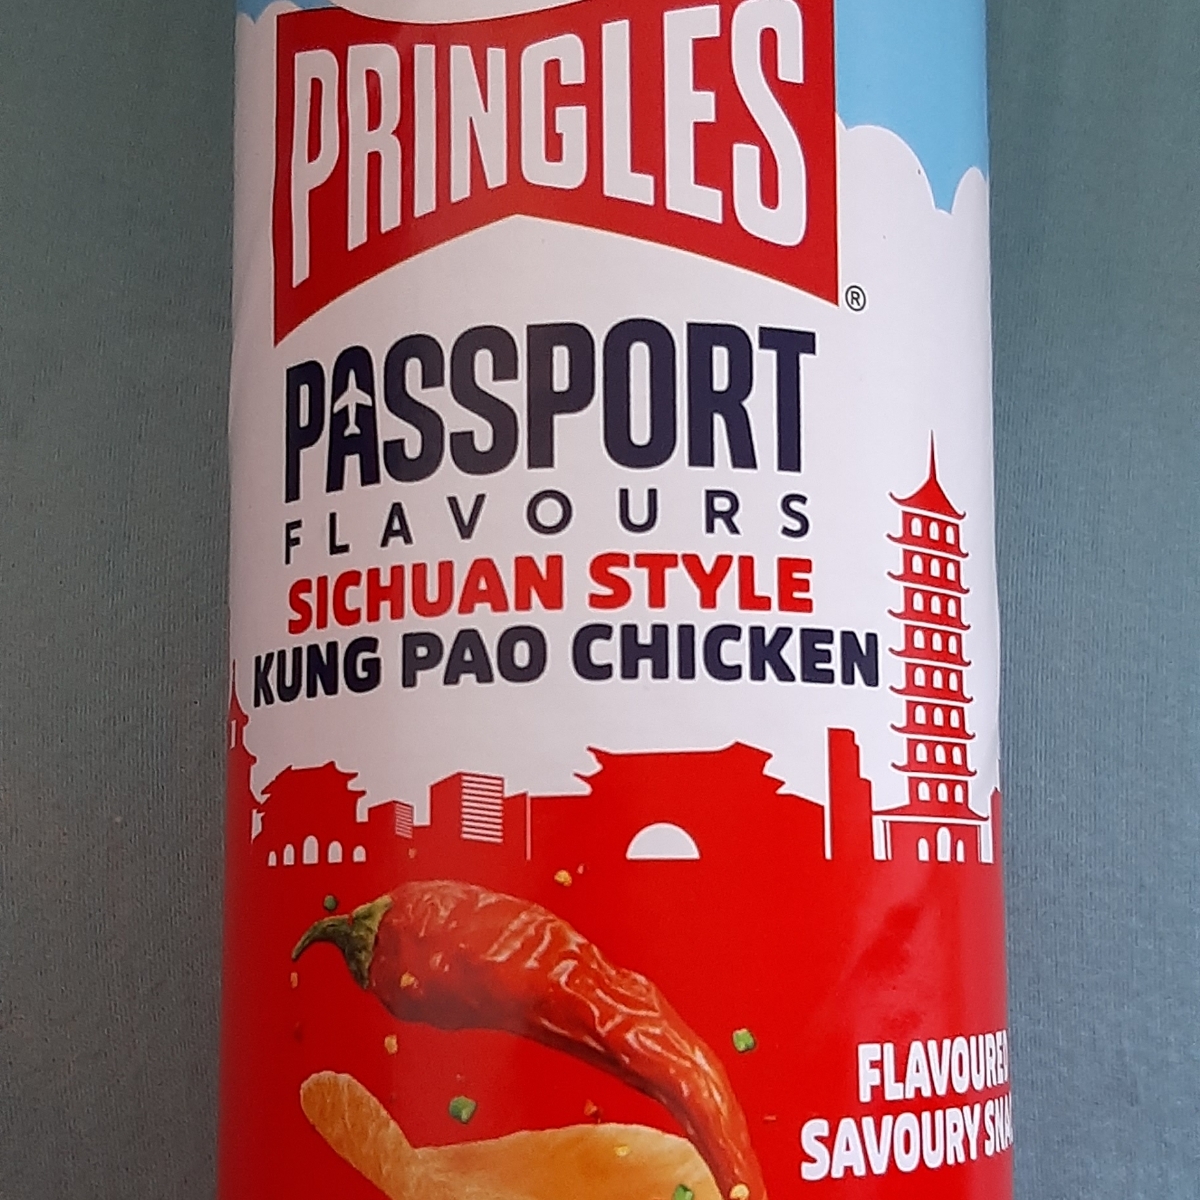 Pringles Sichuan Style Kung Pao Chicken Flavour Review | abillion